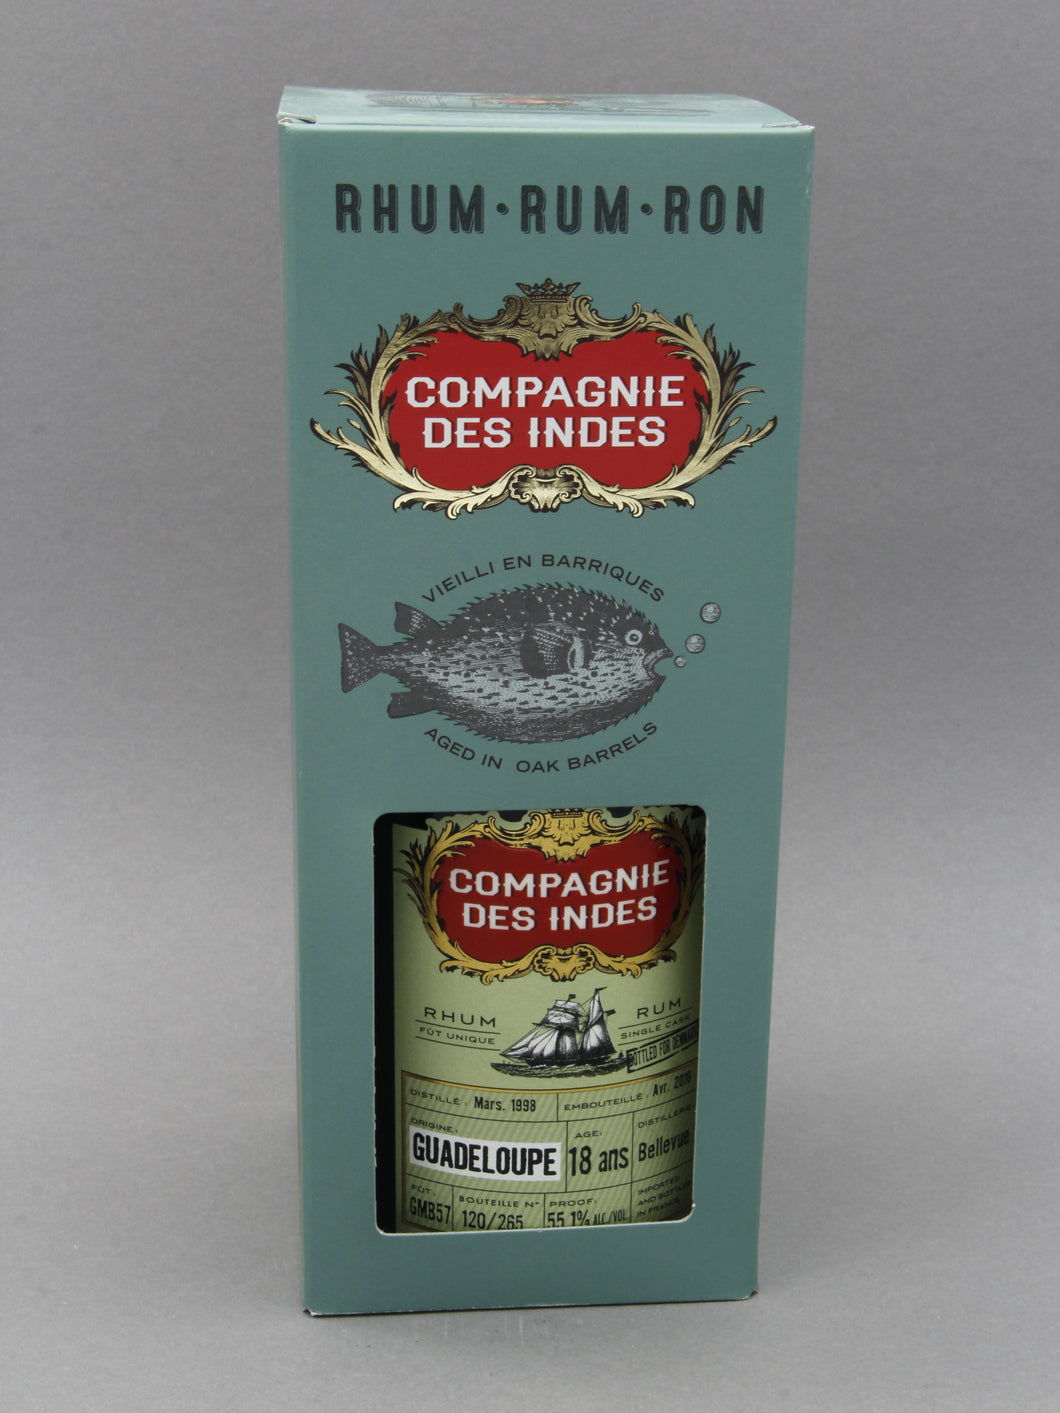 Compagnie Des Indes, Guadeloupe Rhum, 18 Years GMB57 (55.1%, 70cl)